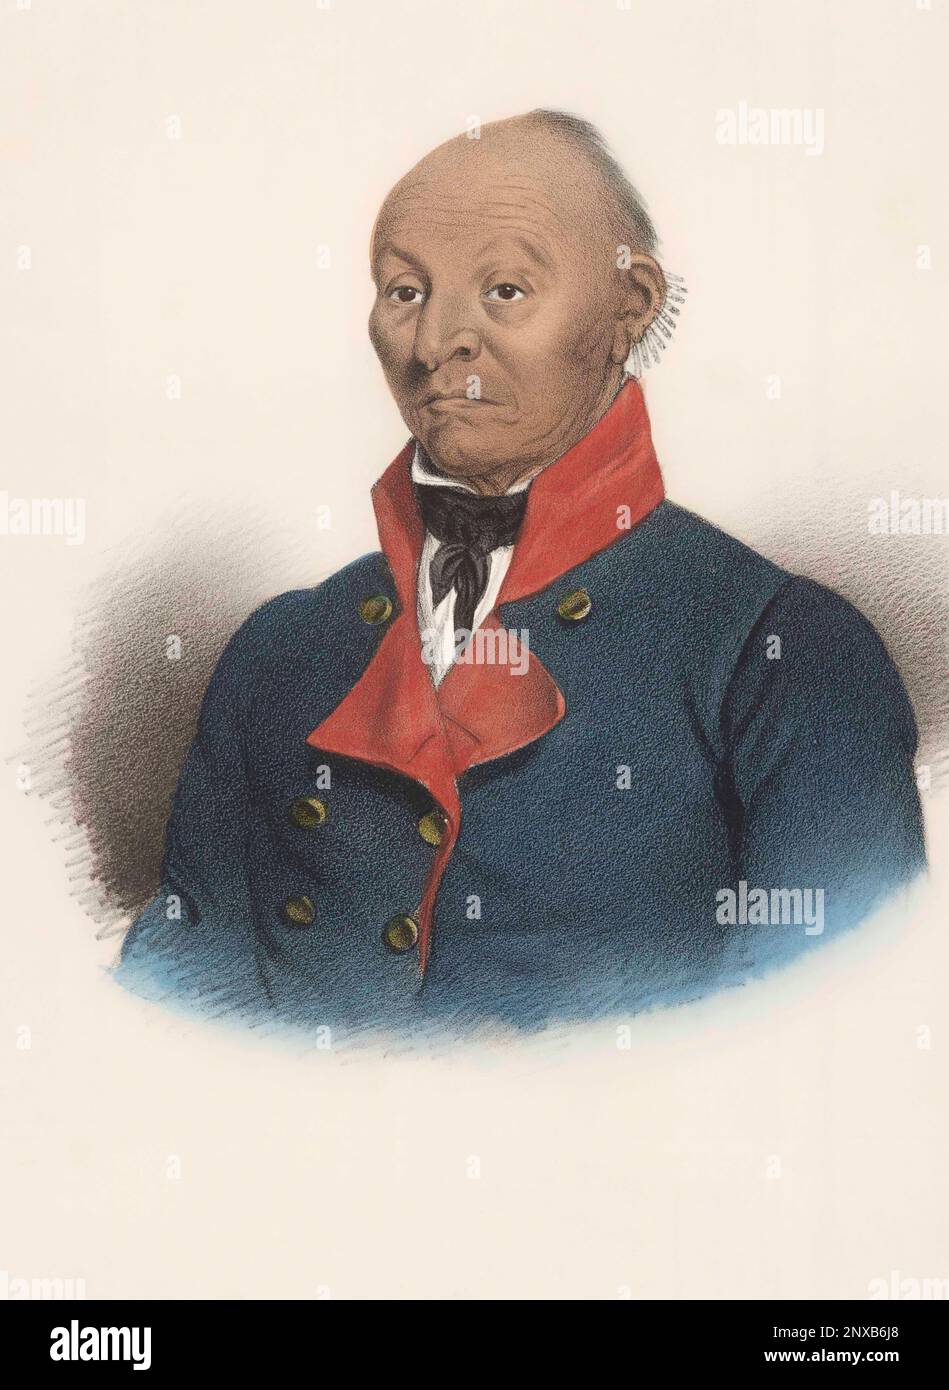 Mac-cut-i-mish-e-ca-cu-cac or Black Hawk. A Celebrated Sac Chief.  After a work by James Otto Lewis. American artist Lewis, 1799 - 1858, attended many treaty meetings and the paintings he made of Indian dignatories were amongst those published in his Aboriginal Port Folio, 1835-1836. Stock Photo